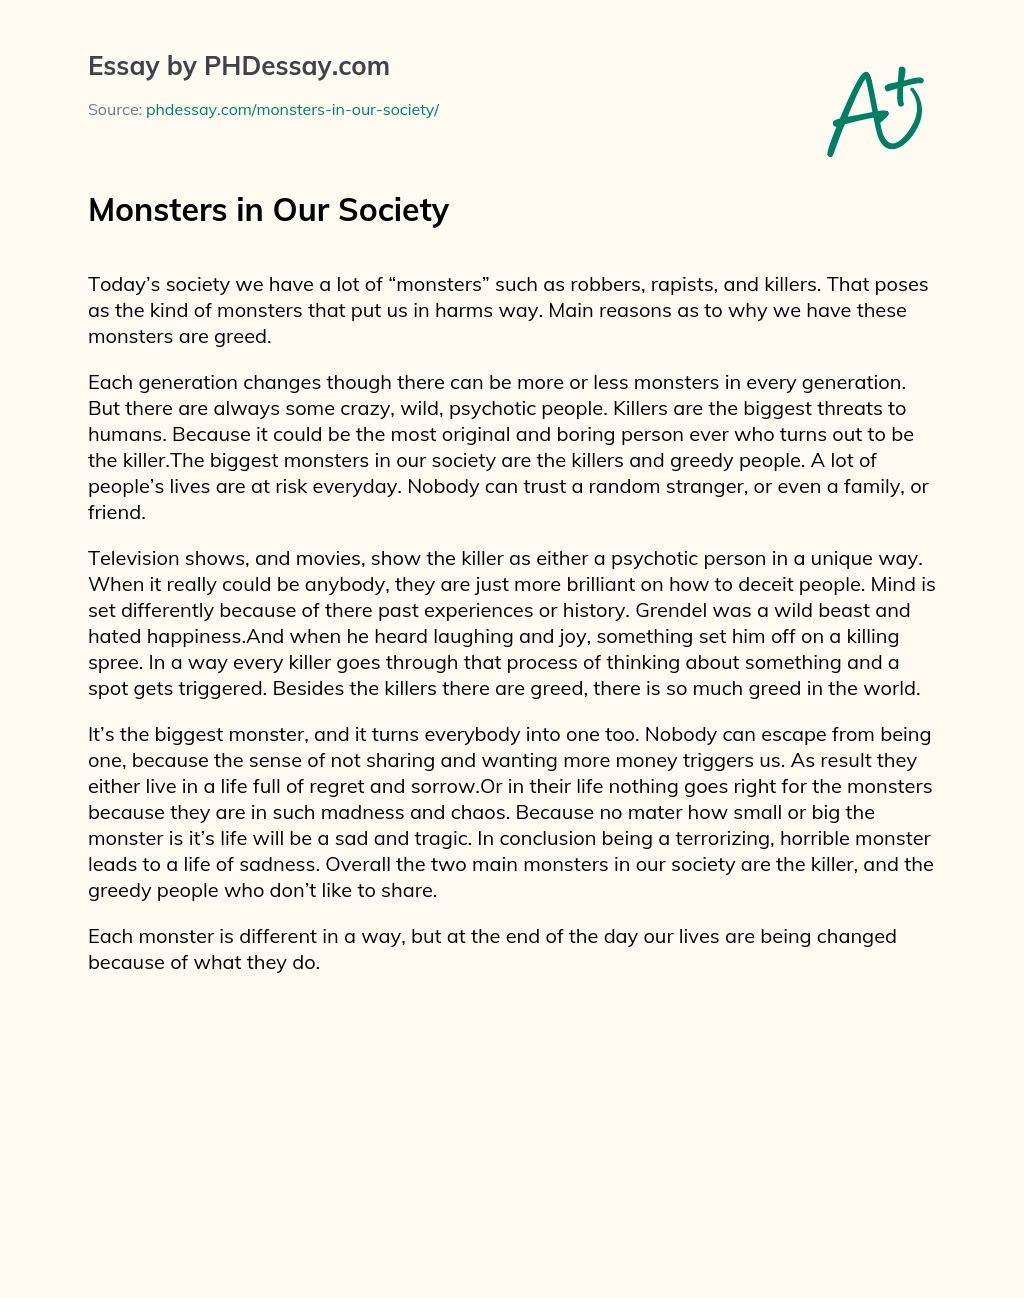 Monsters in Our Society essay